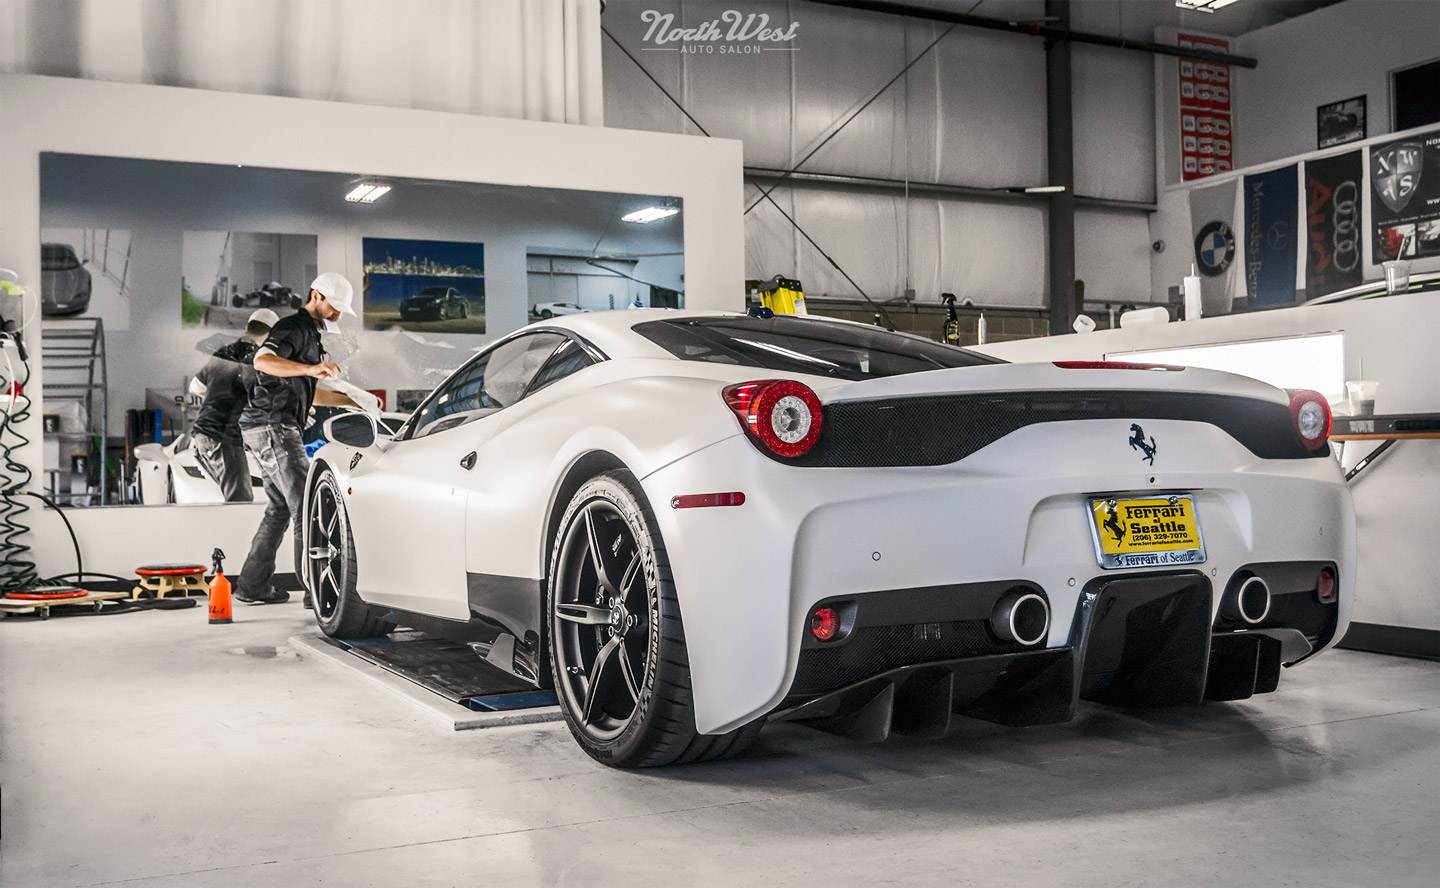 Ferrari 458 Speciale wrapped in XPEL Stealth paint protection